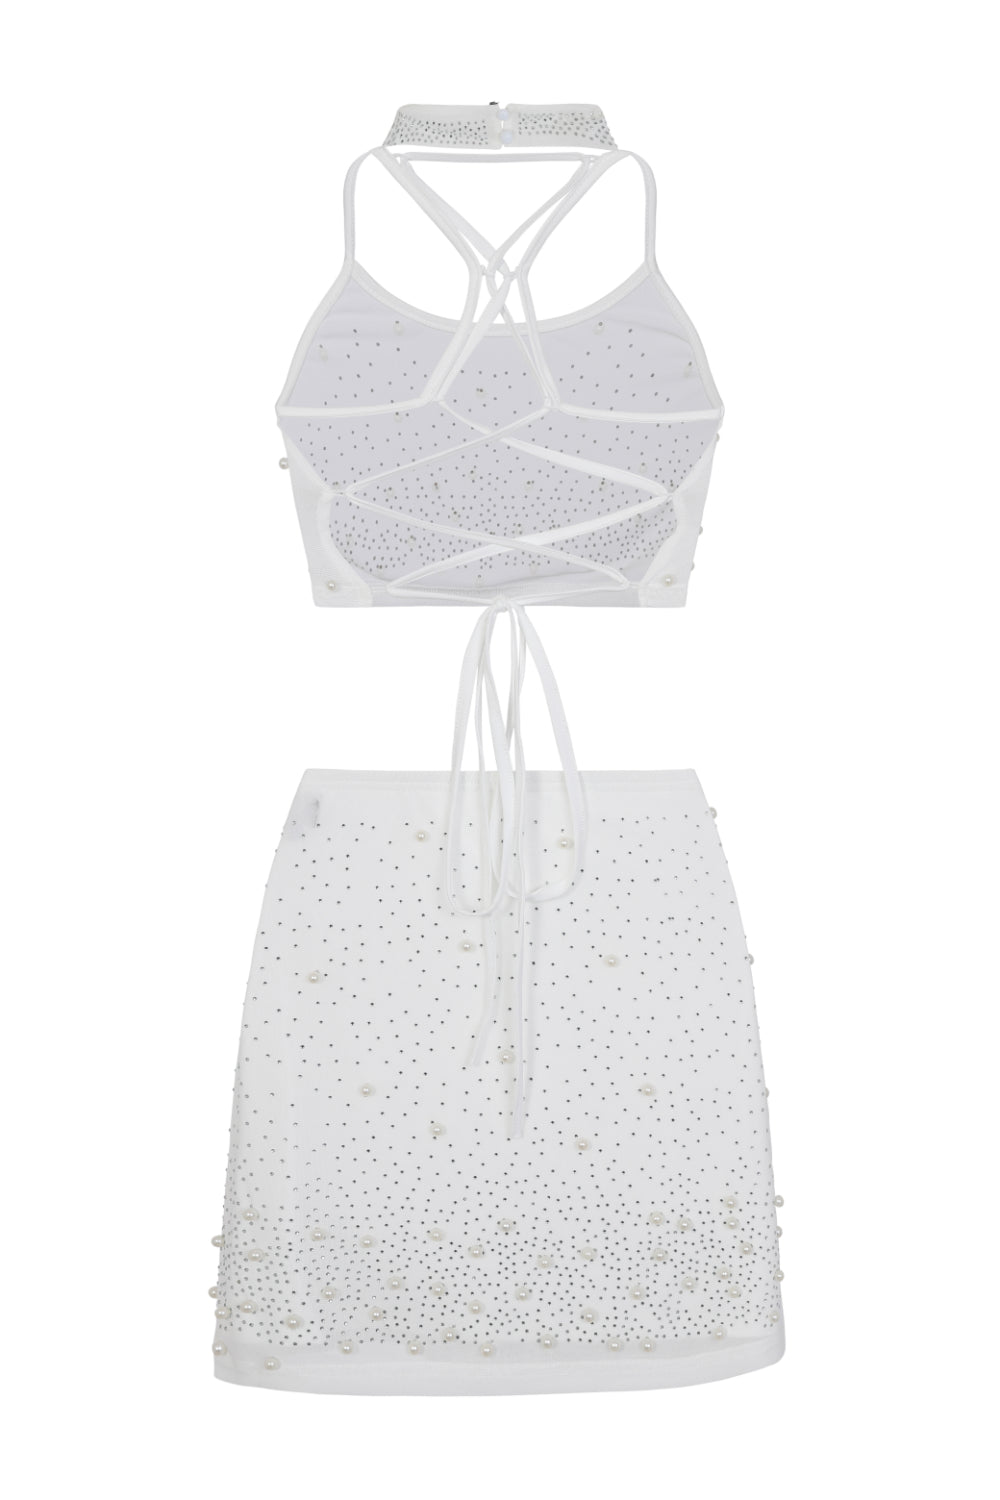 Caution White VIP Rhinestone & Pearls Embellished Skirt Top Two Piece Set